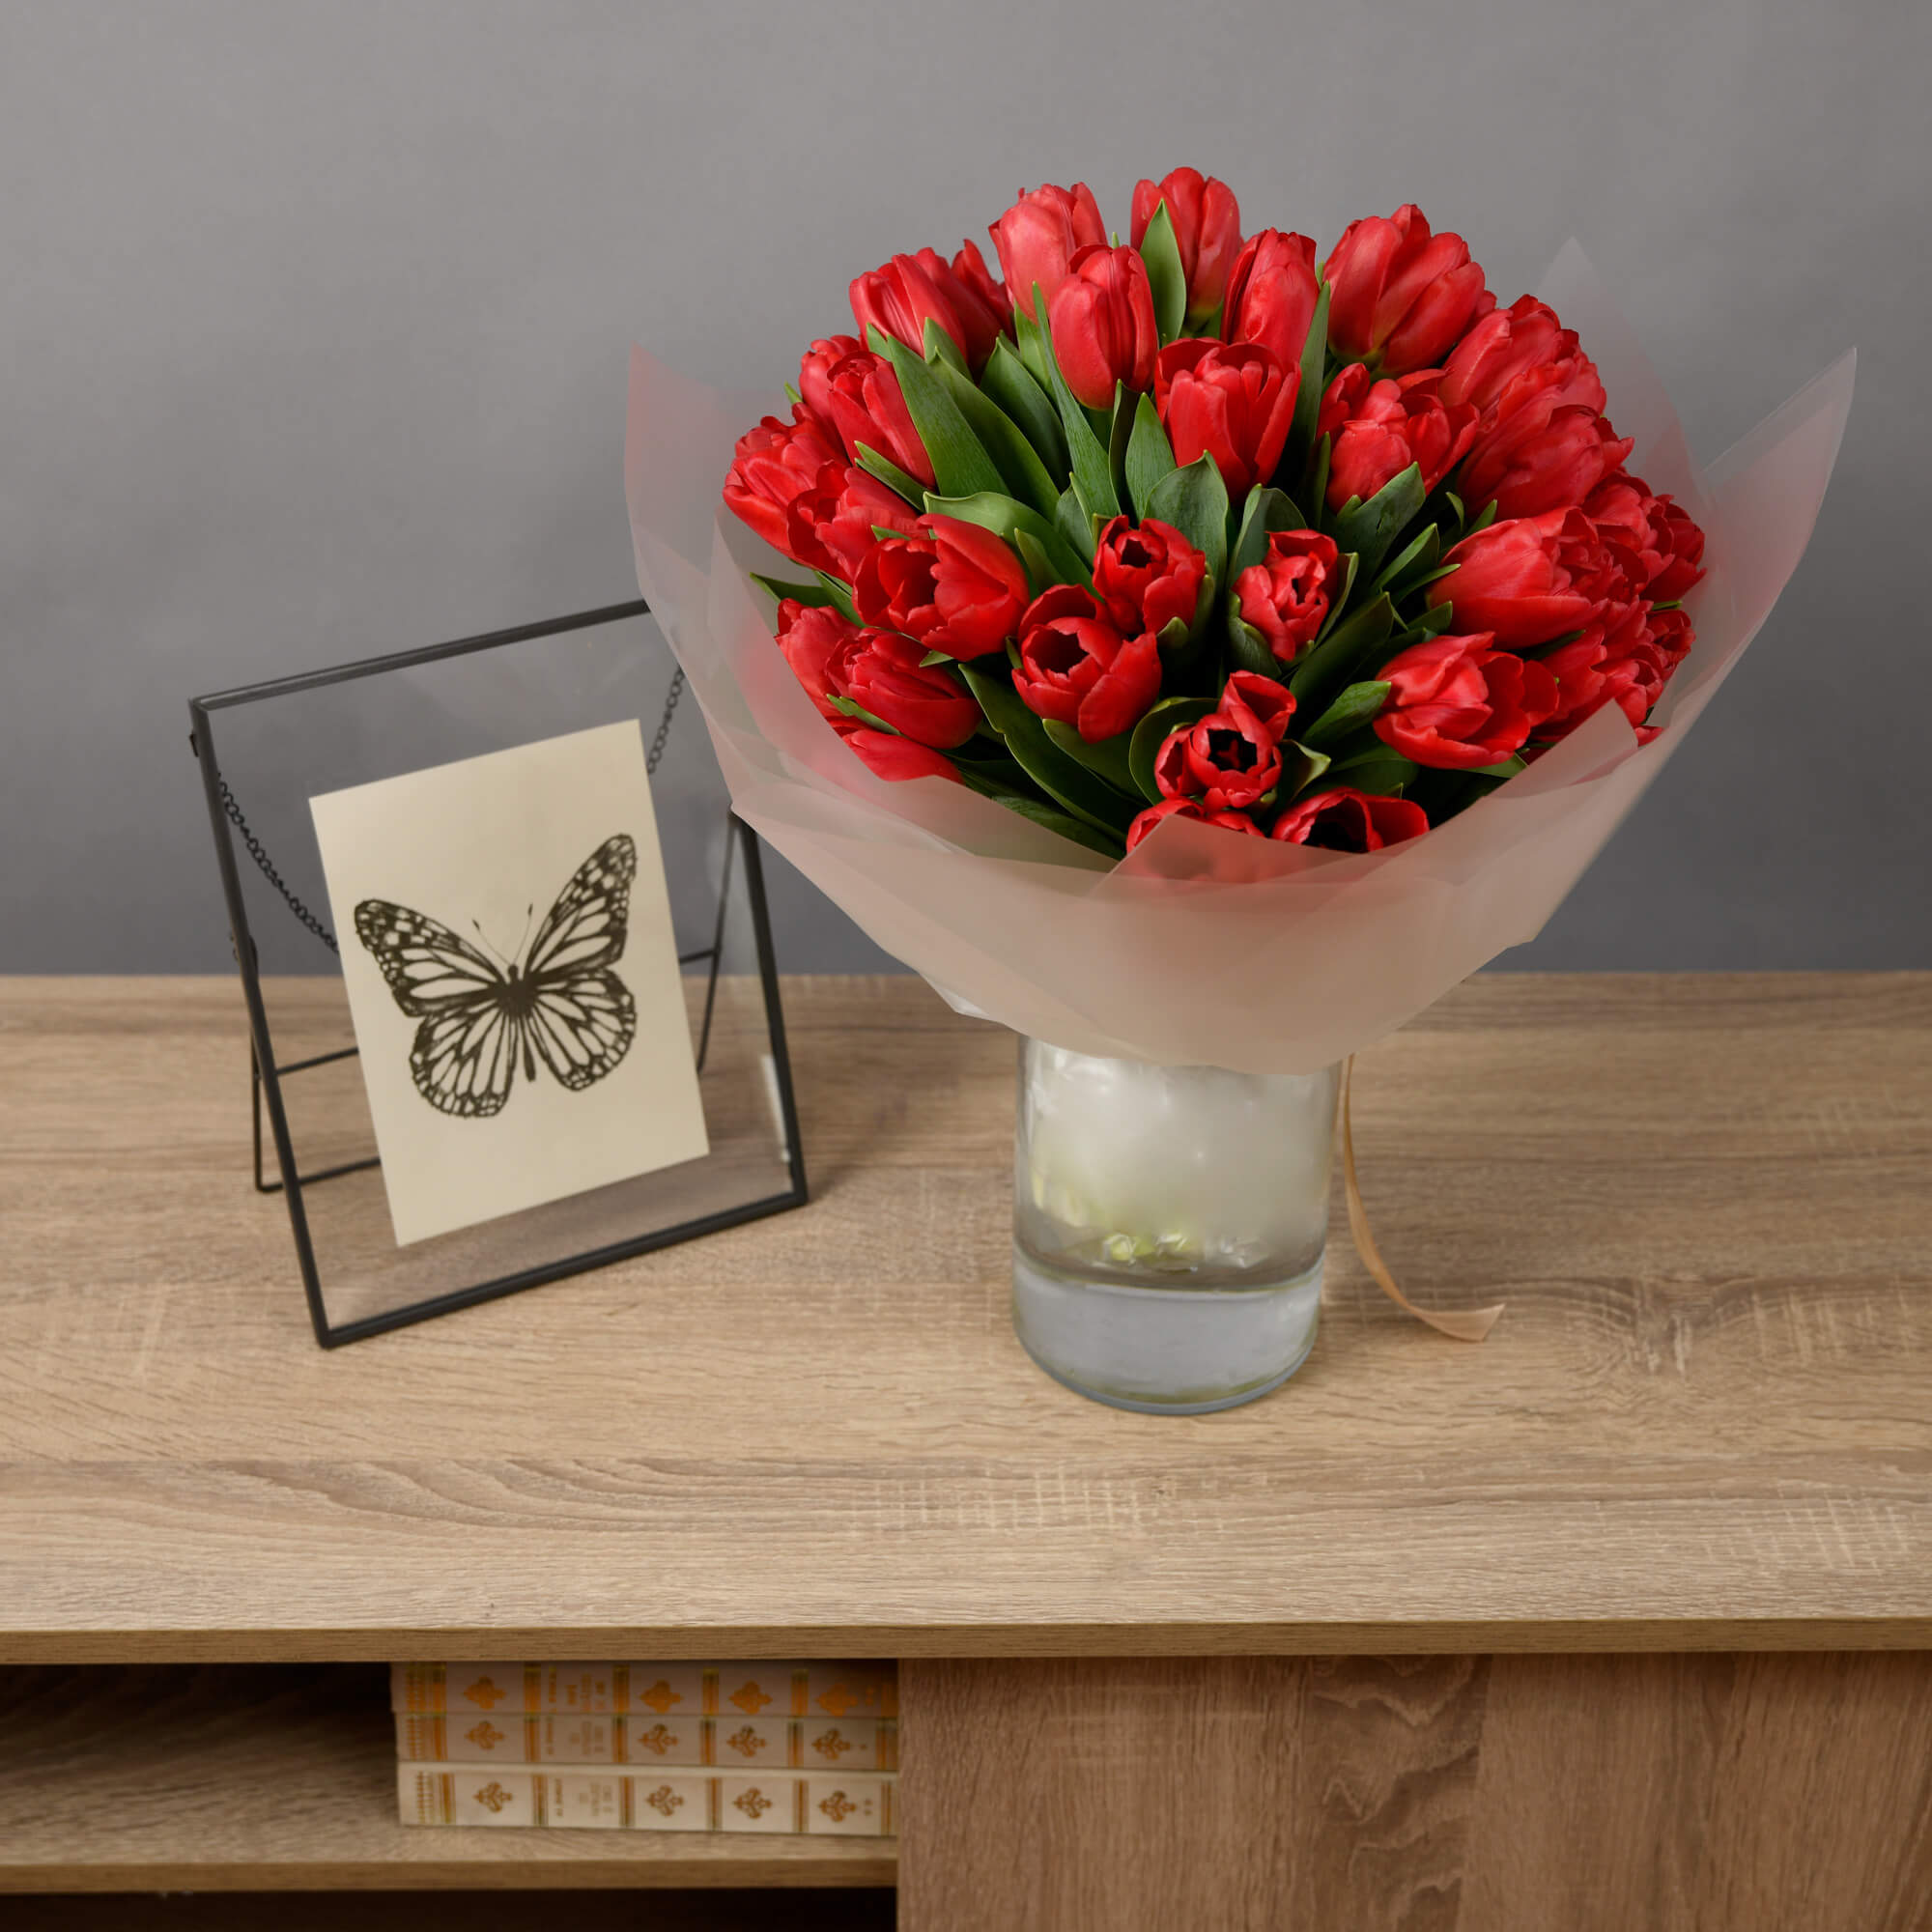 Bouquet with 49 red tulips